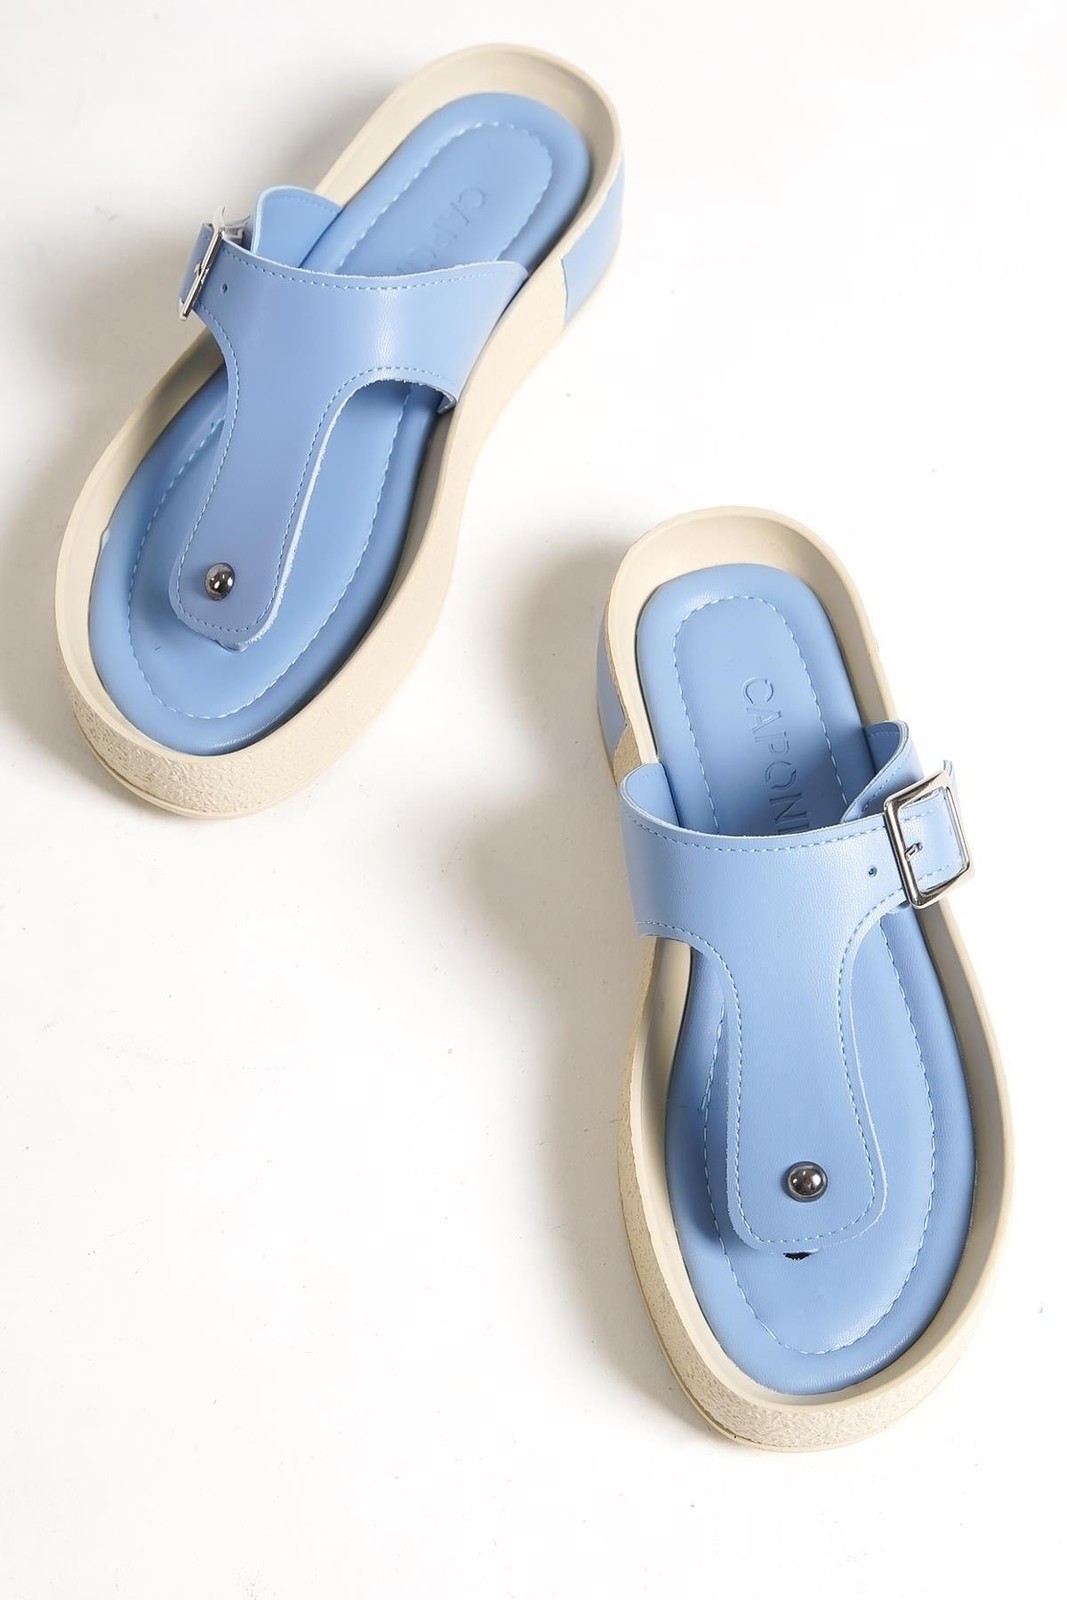 Capone Outfitters Capone Flip Flops with Side Belt Buckle Colorful Detailed Wedge Heel Denim Blue Women's Slippers